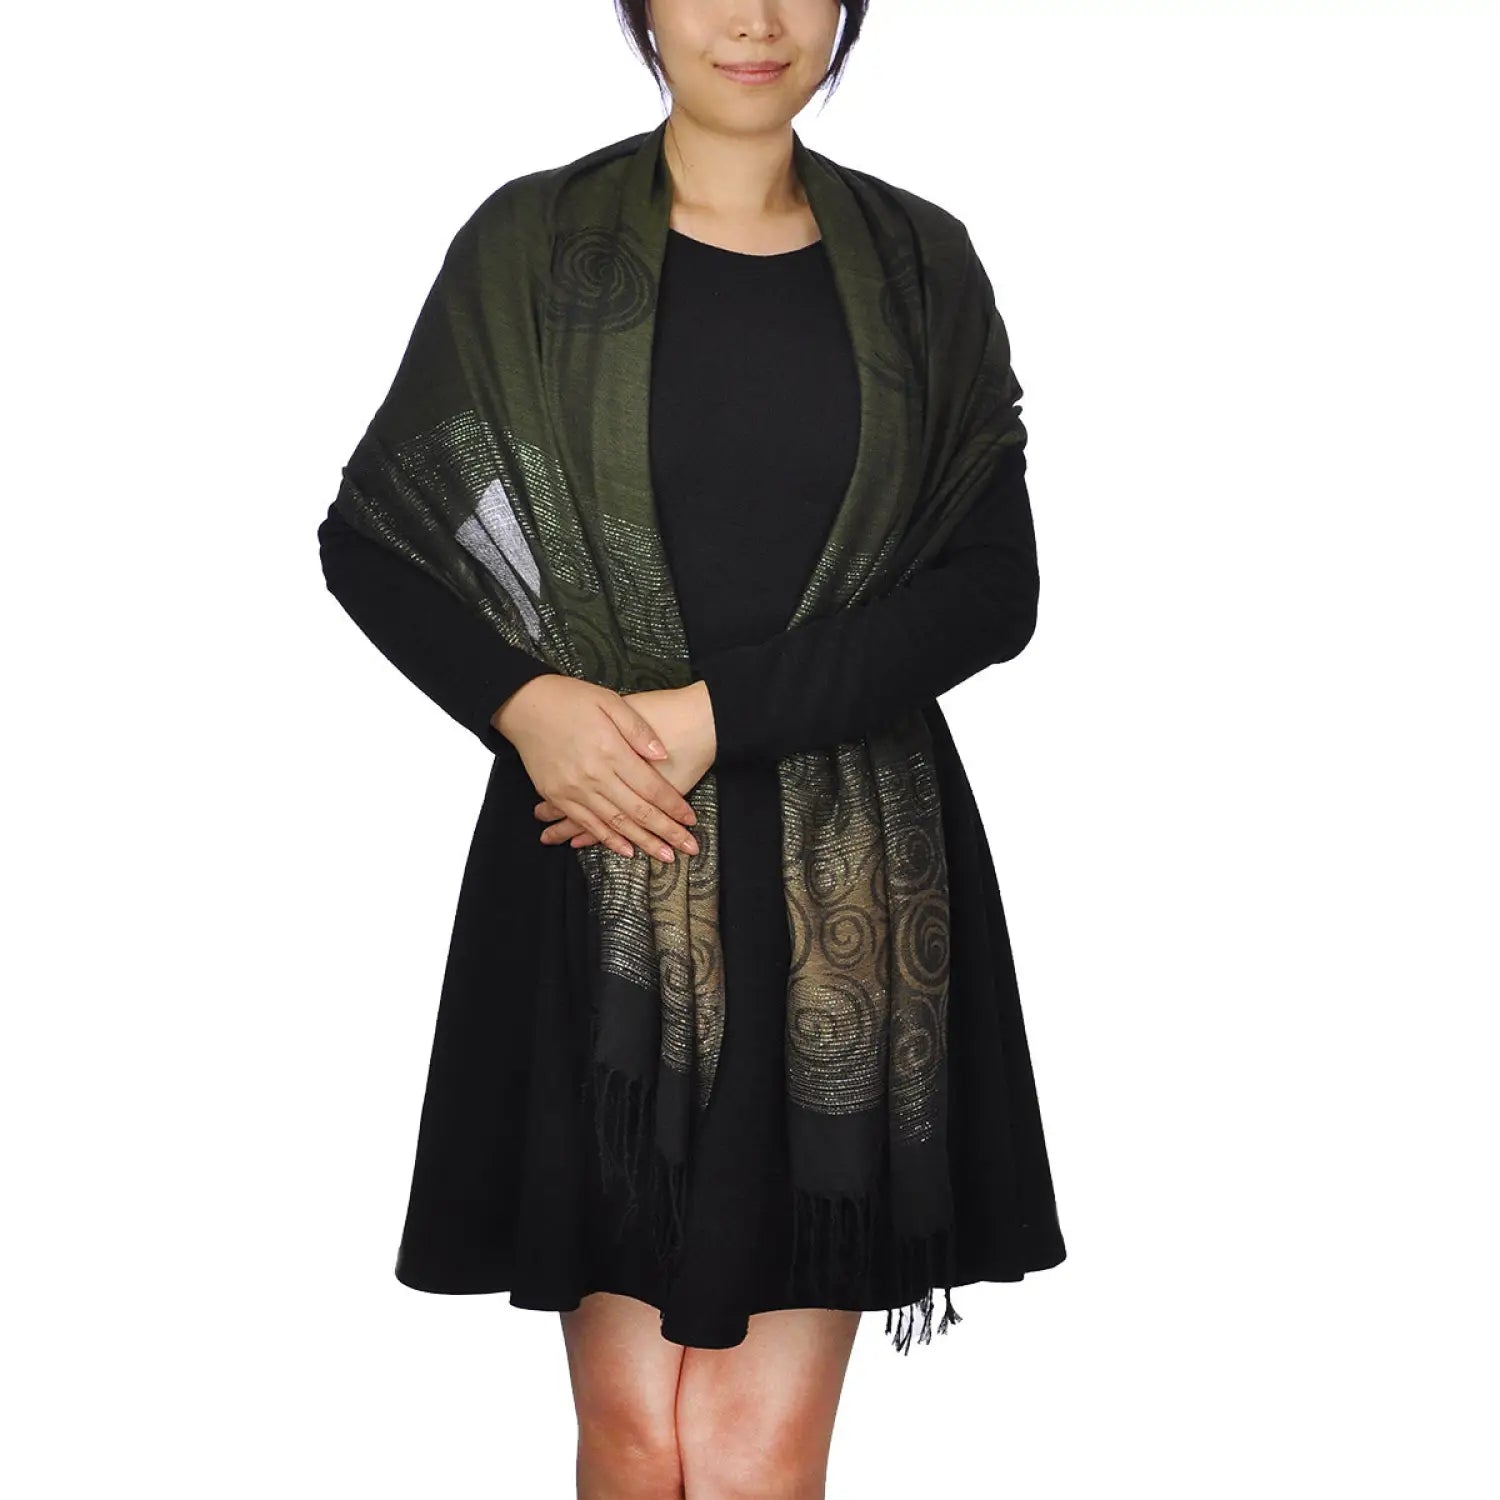 Woman wearing black dress and green scarf, featured in Glittery Two-Tone Ombre Tasselled Scarf Shawl.